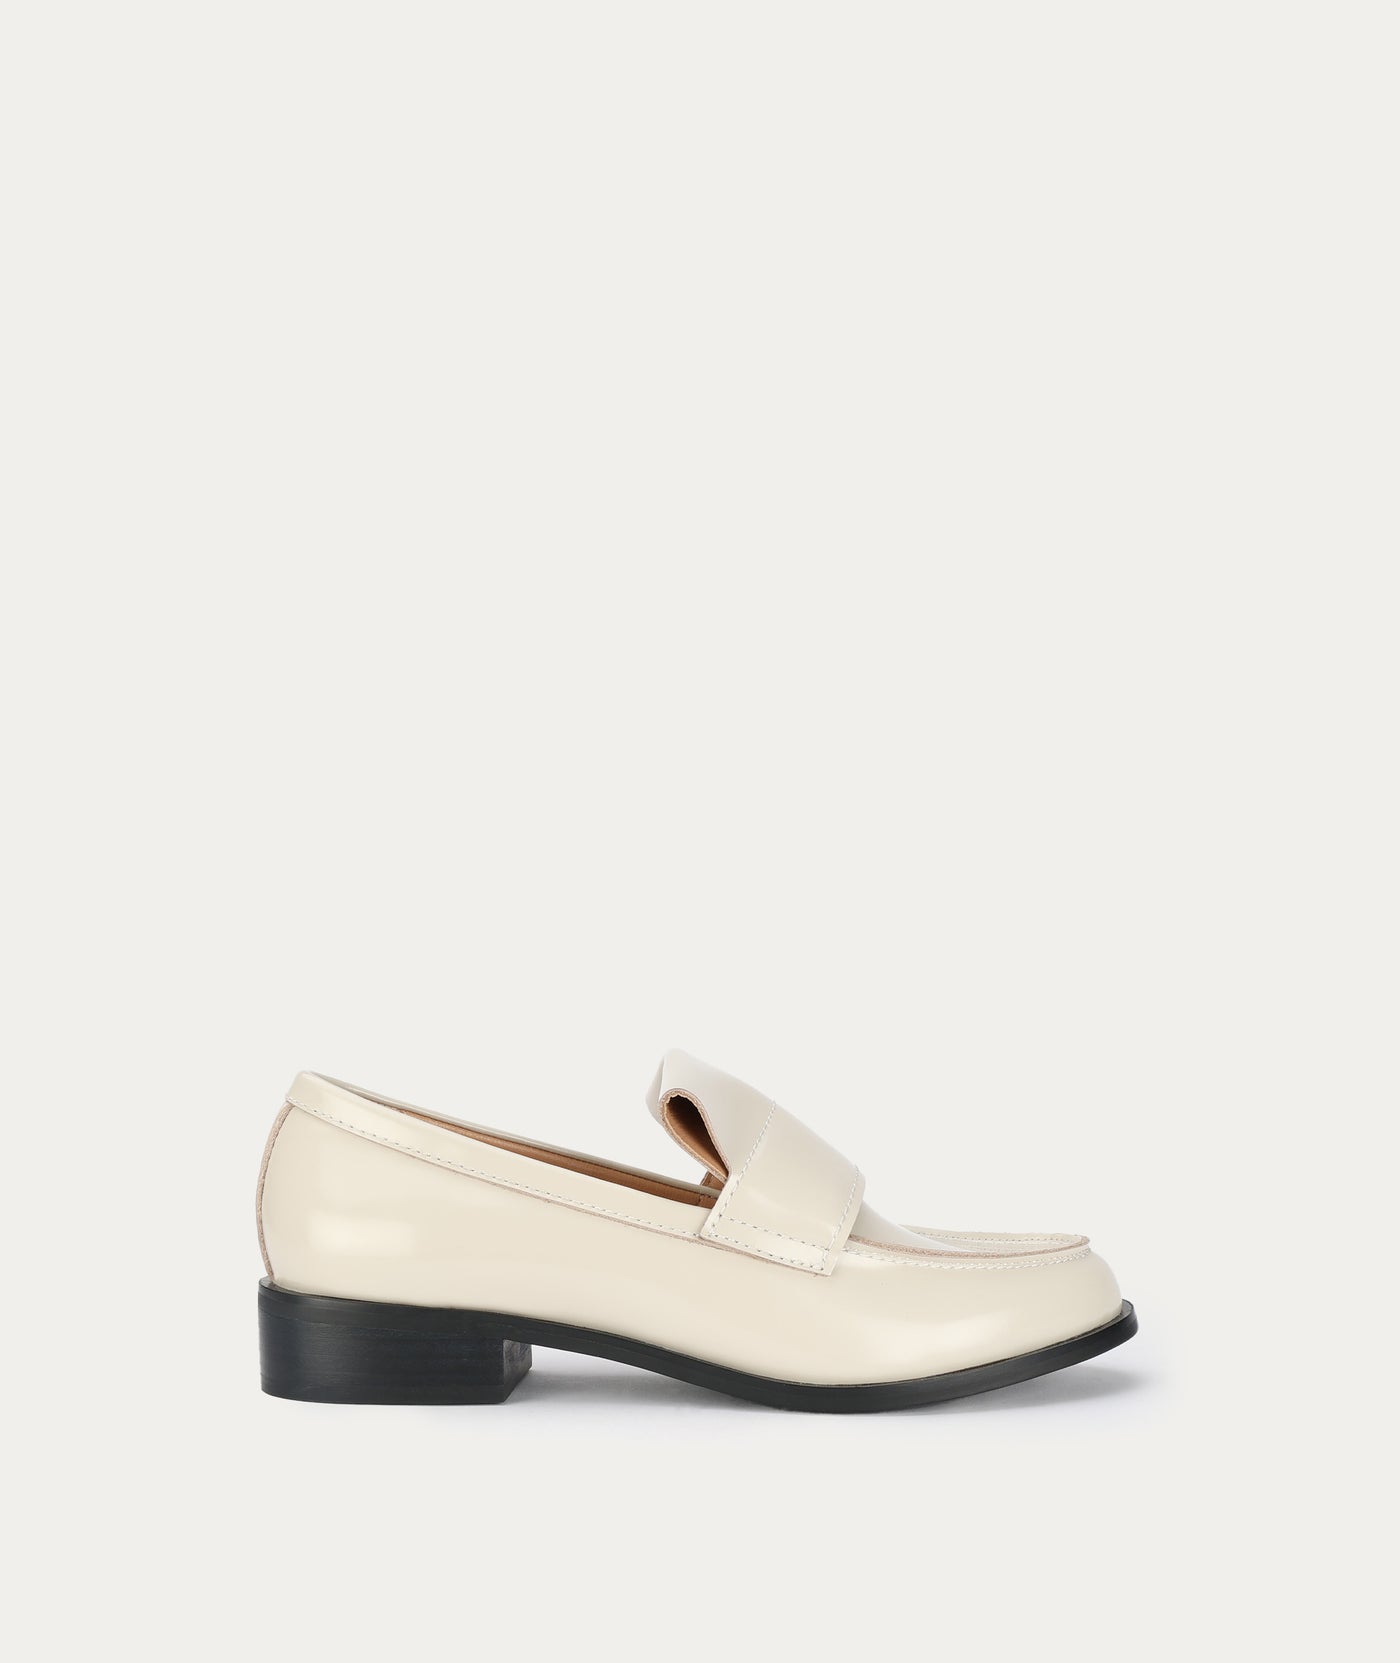 Cheval Loafer